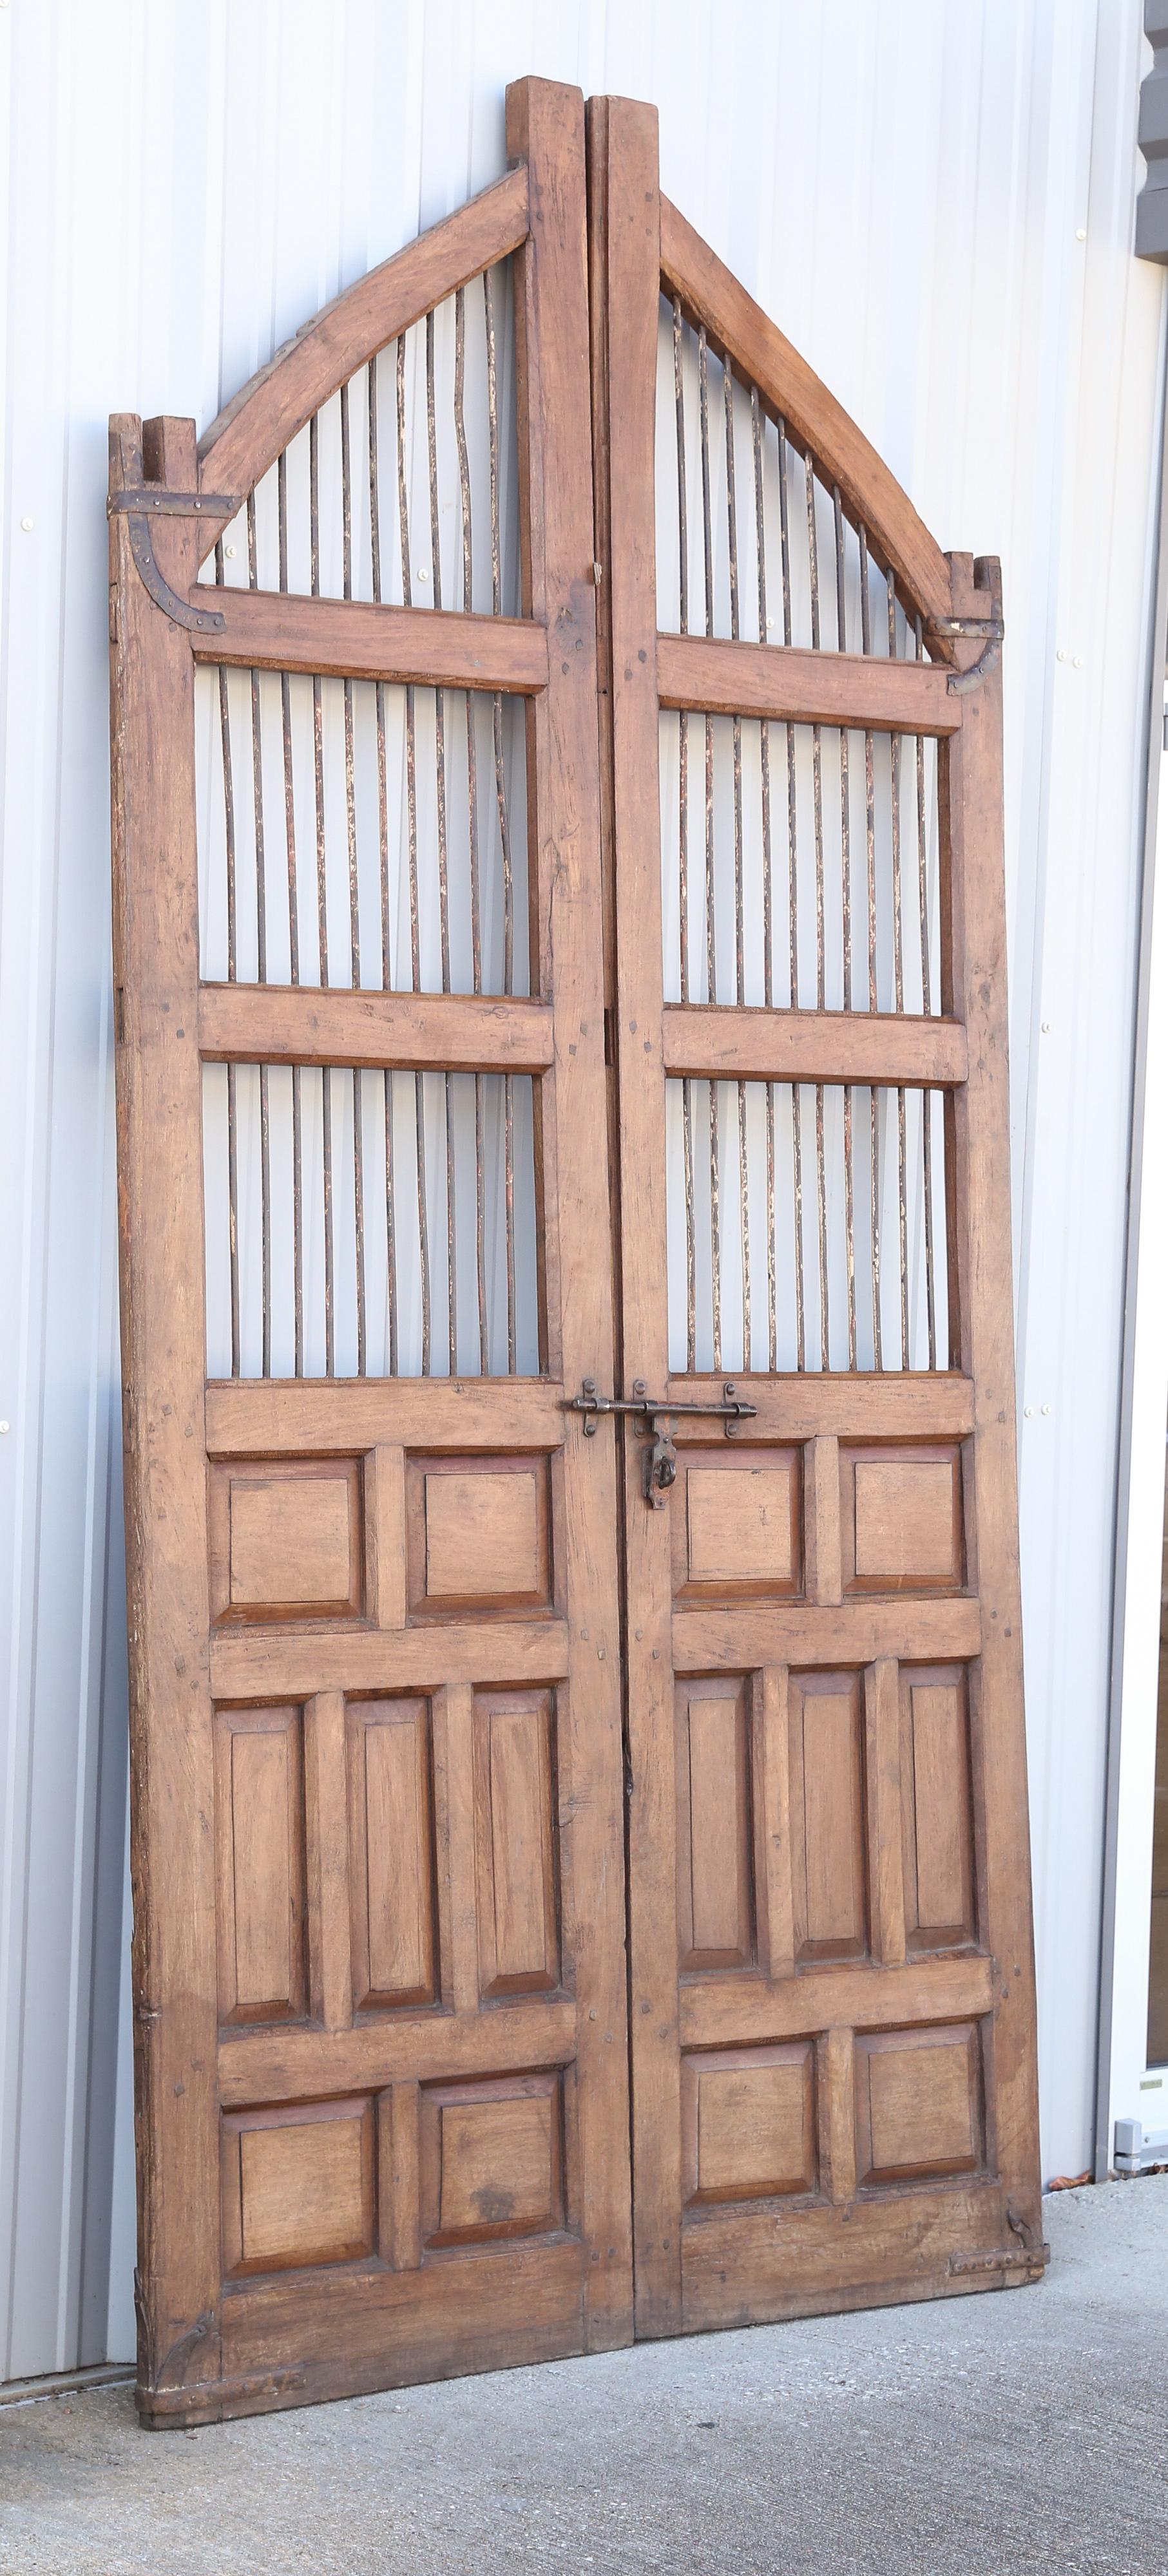 Hand-Crafted 1820s Solid Teak Wood Side Entry Door of a Feudal Landlord's Court Yard Home For Sale